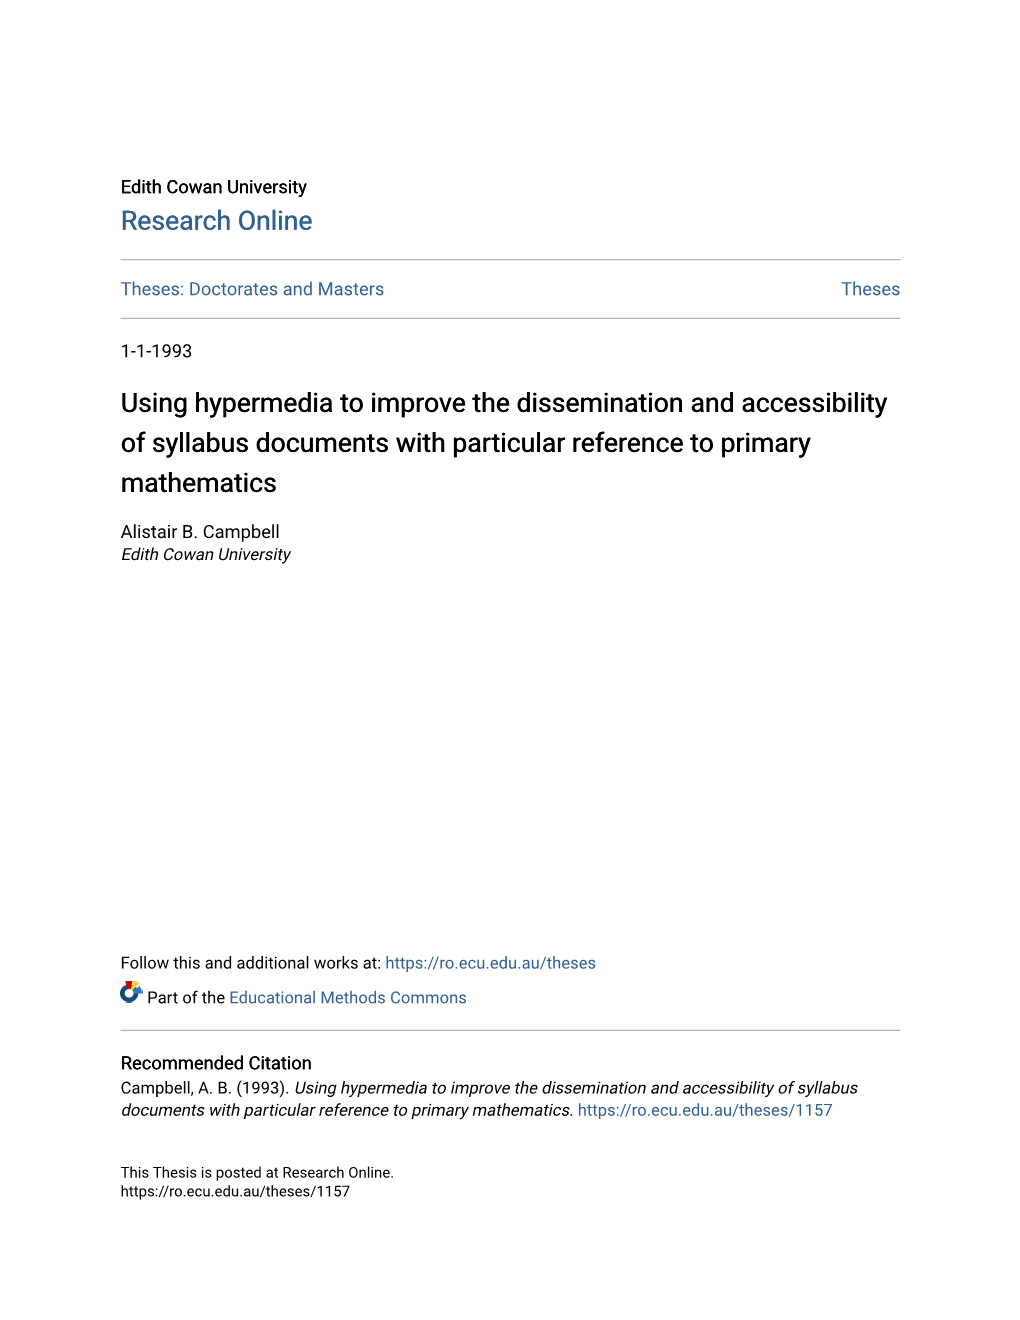 Using Hypermedia to Improve the Dissemination and Accessibility of Syllabus Documents with Particular Reference to Primary Mathematics